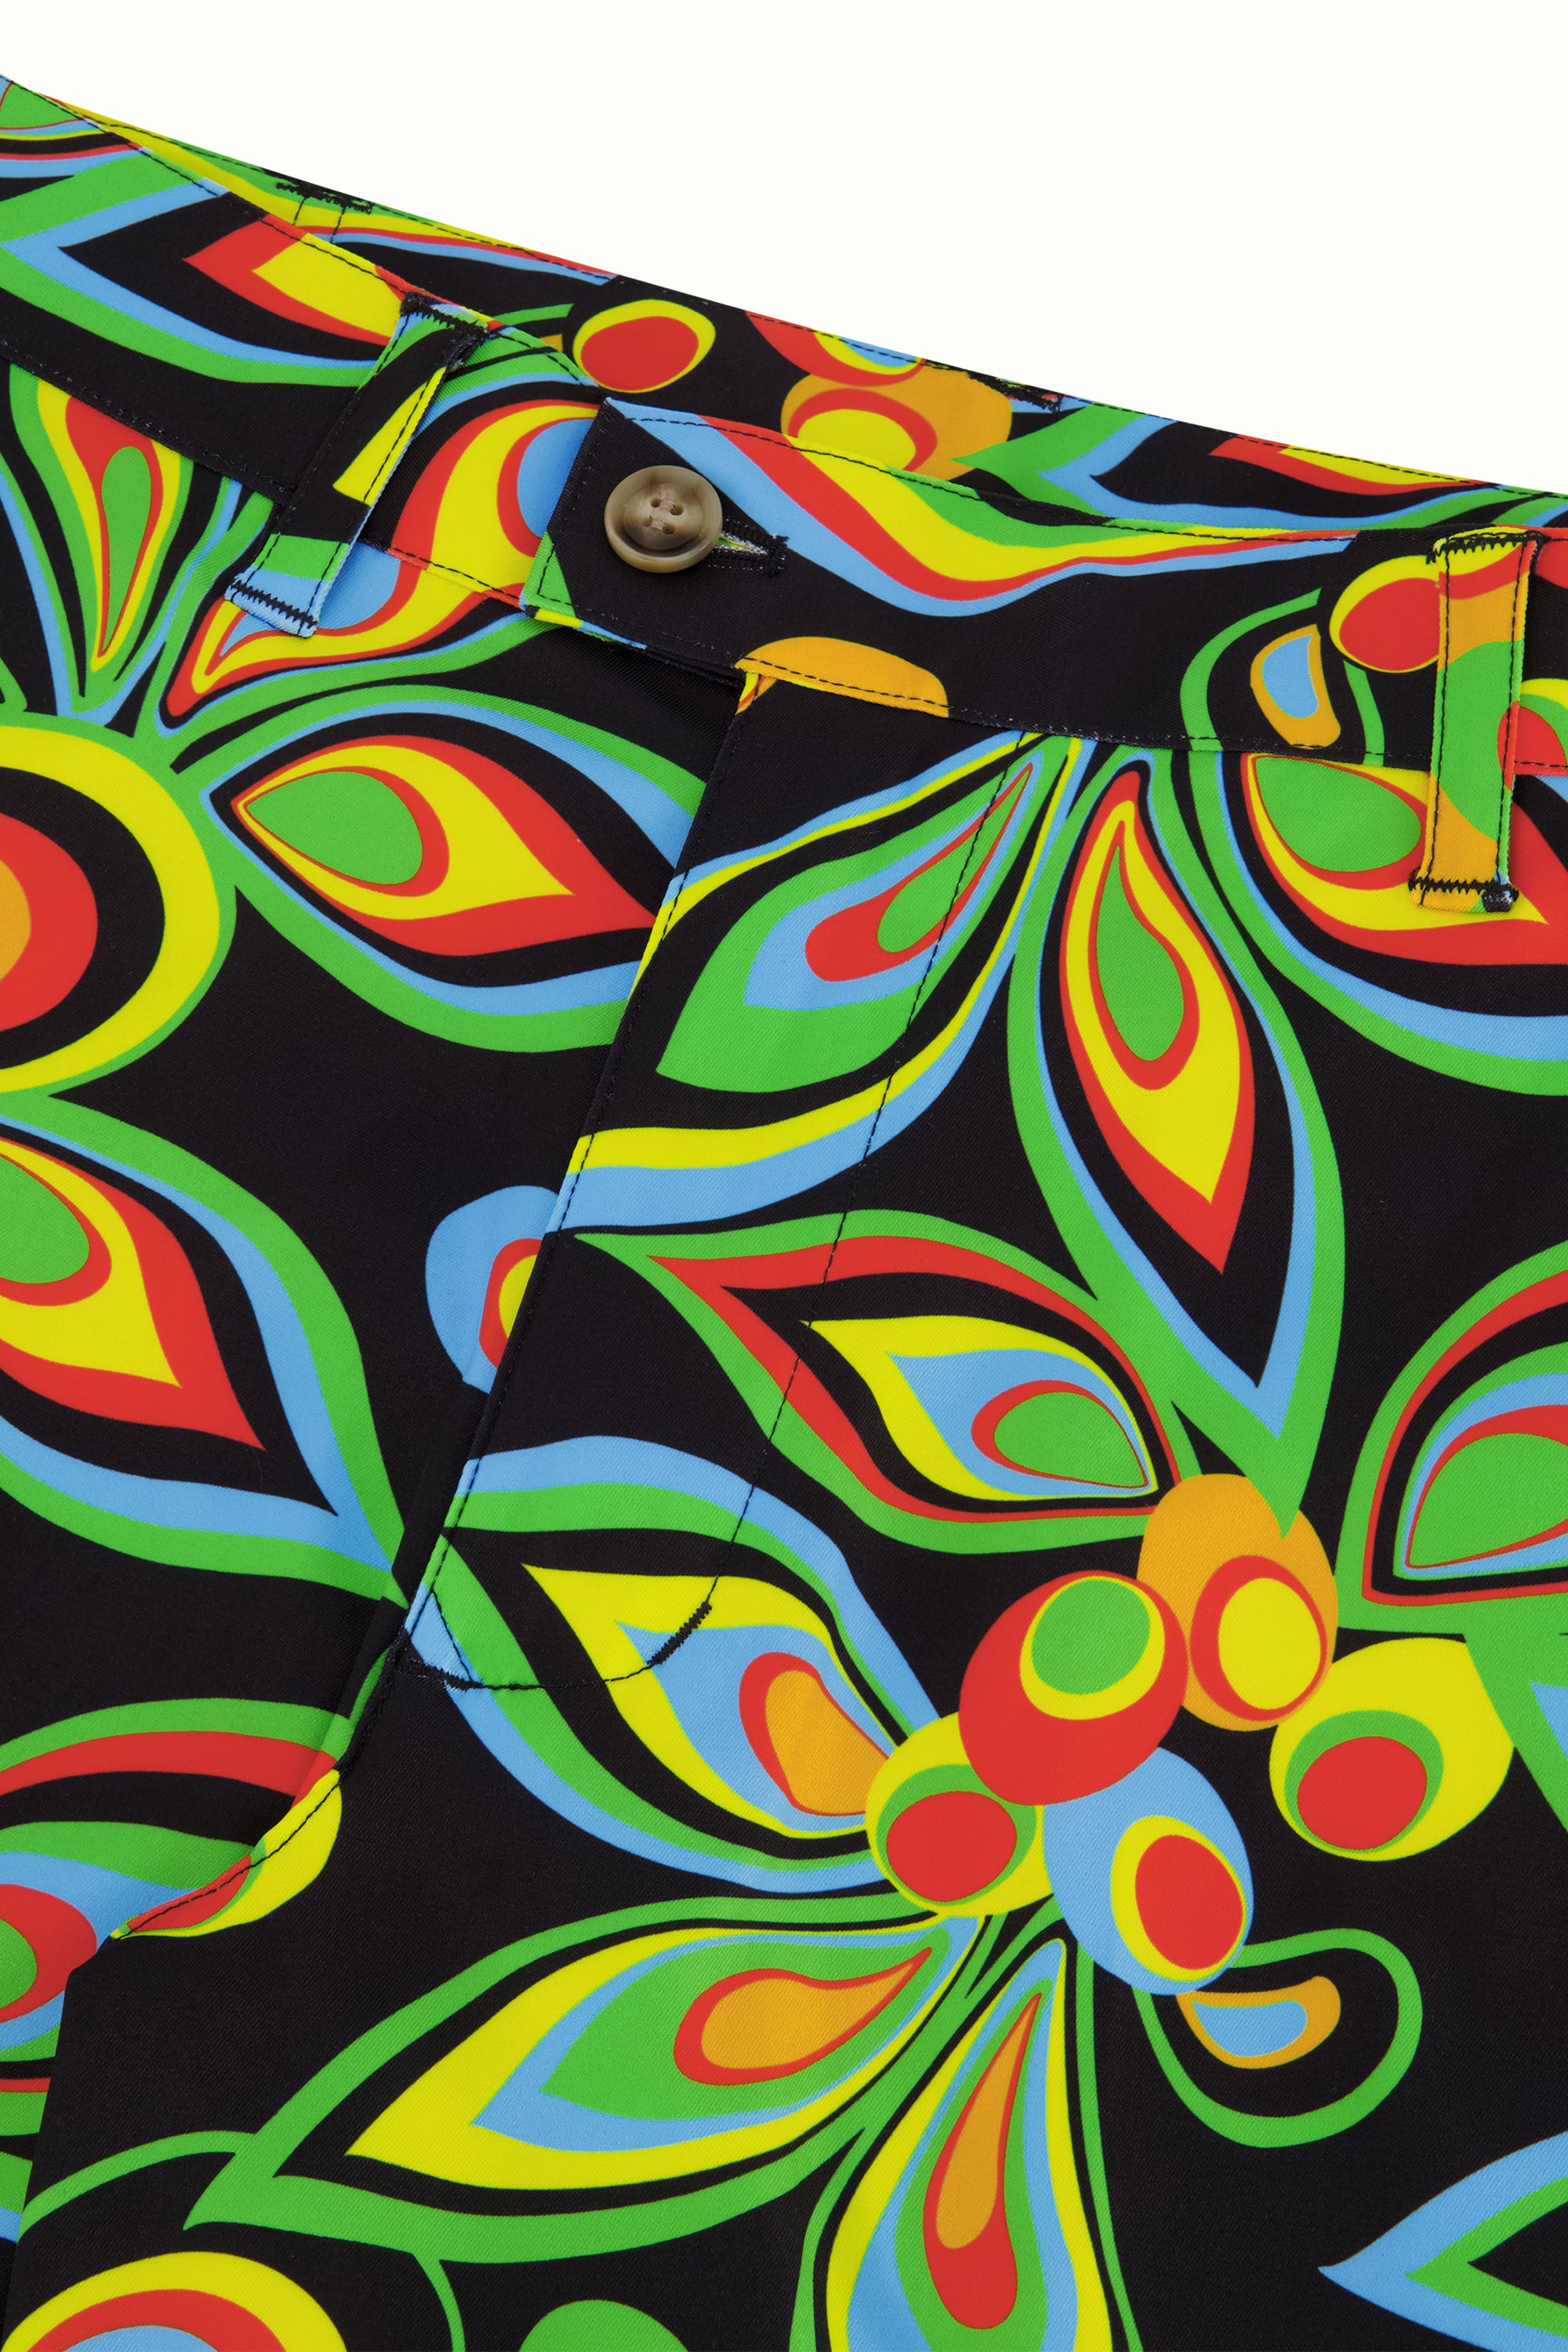 A short with a black background and colorful pattern